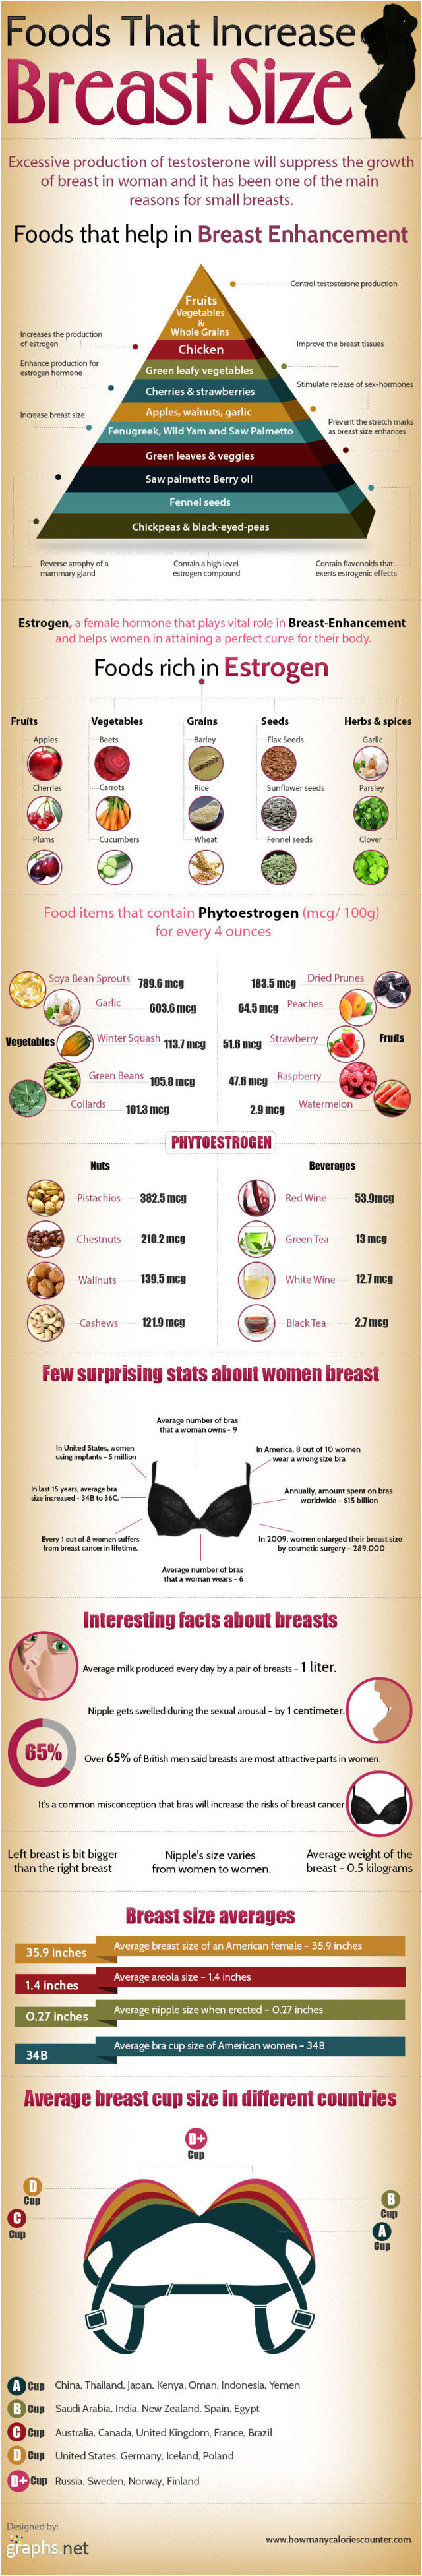 Increase Breast Size 110